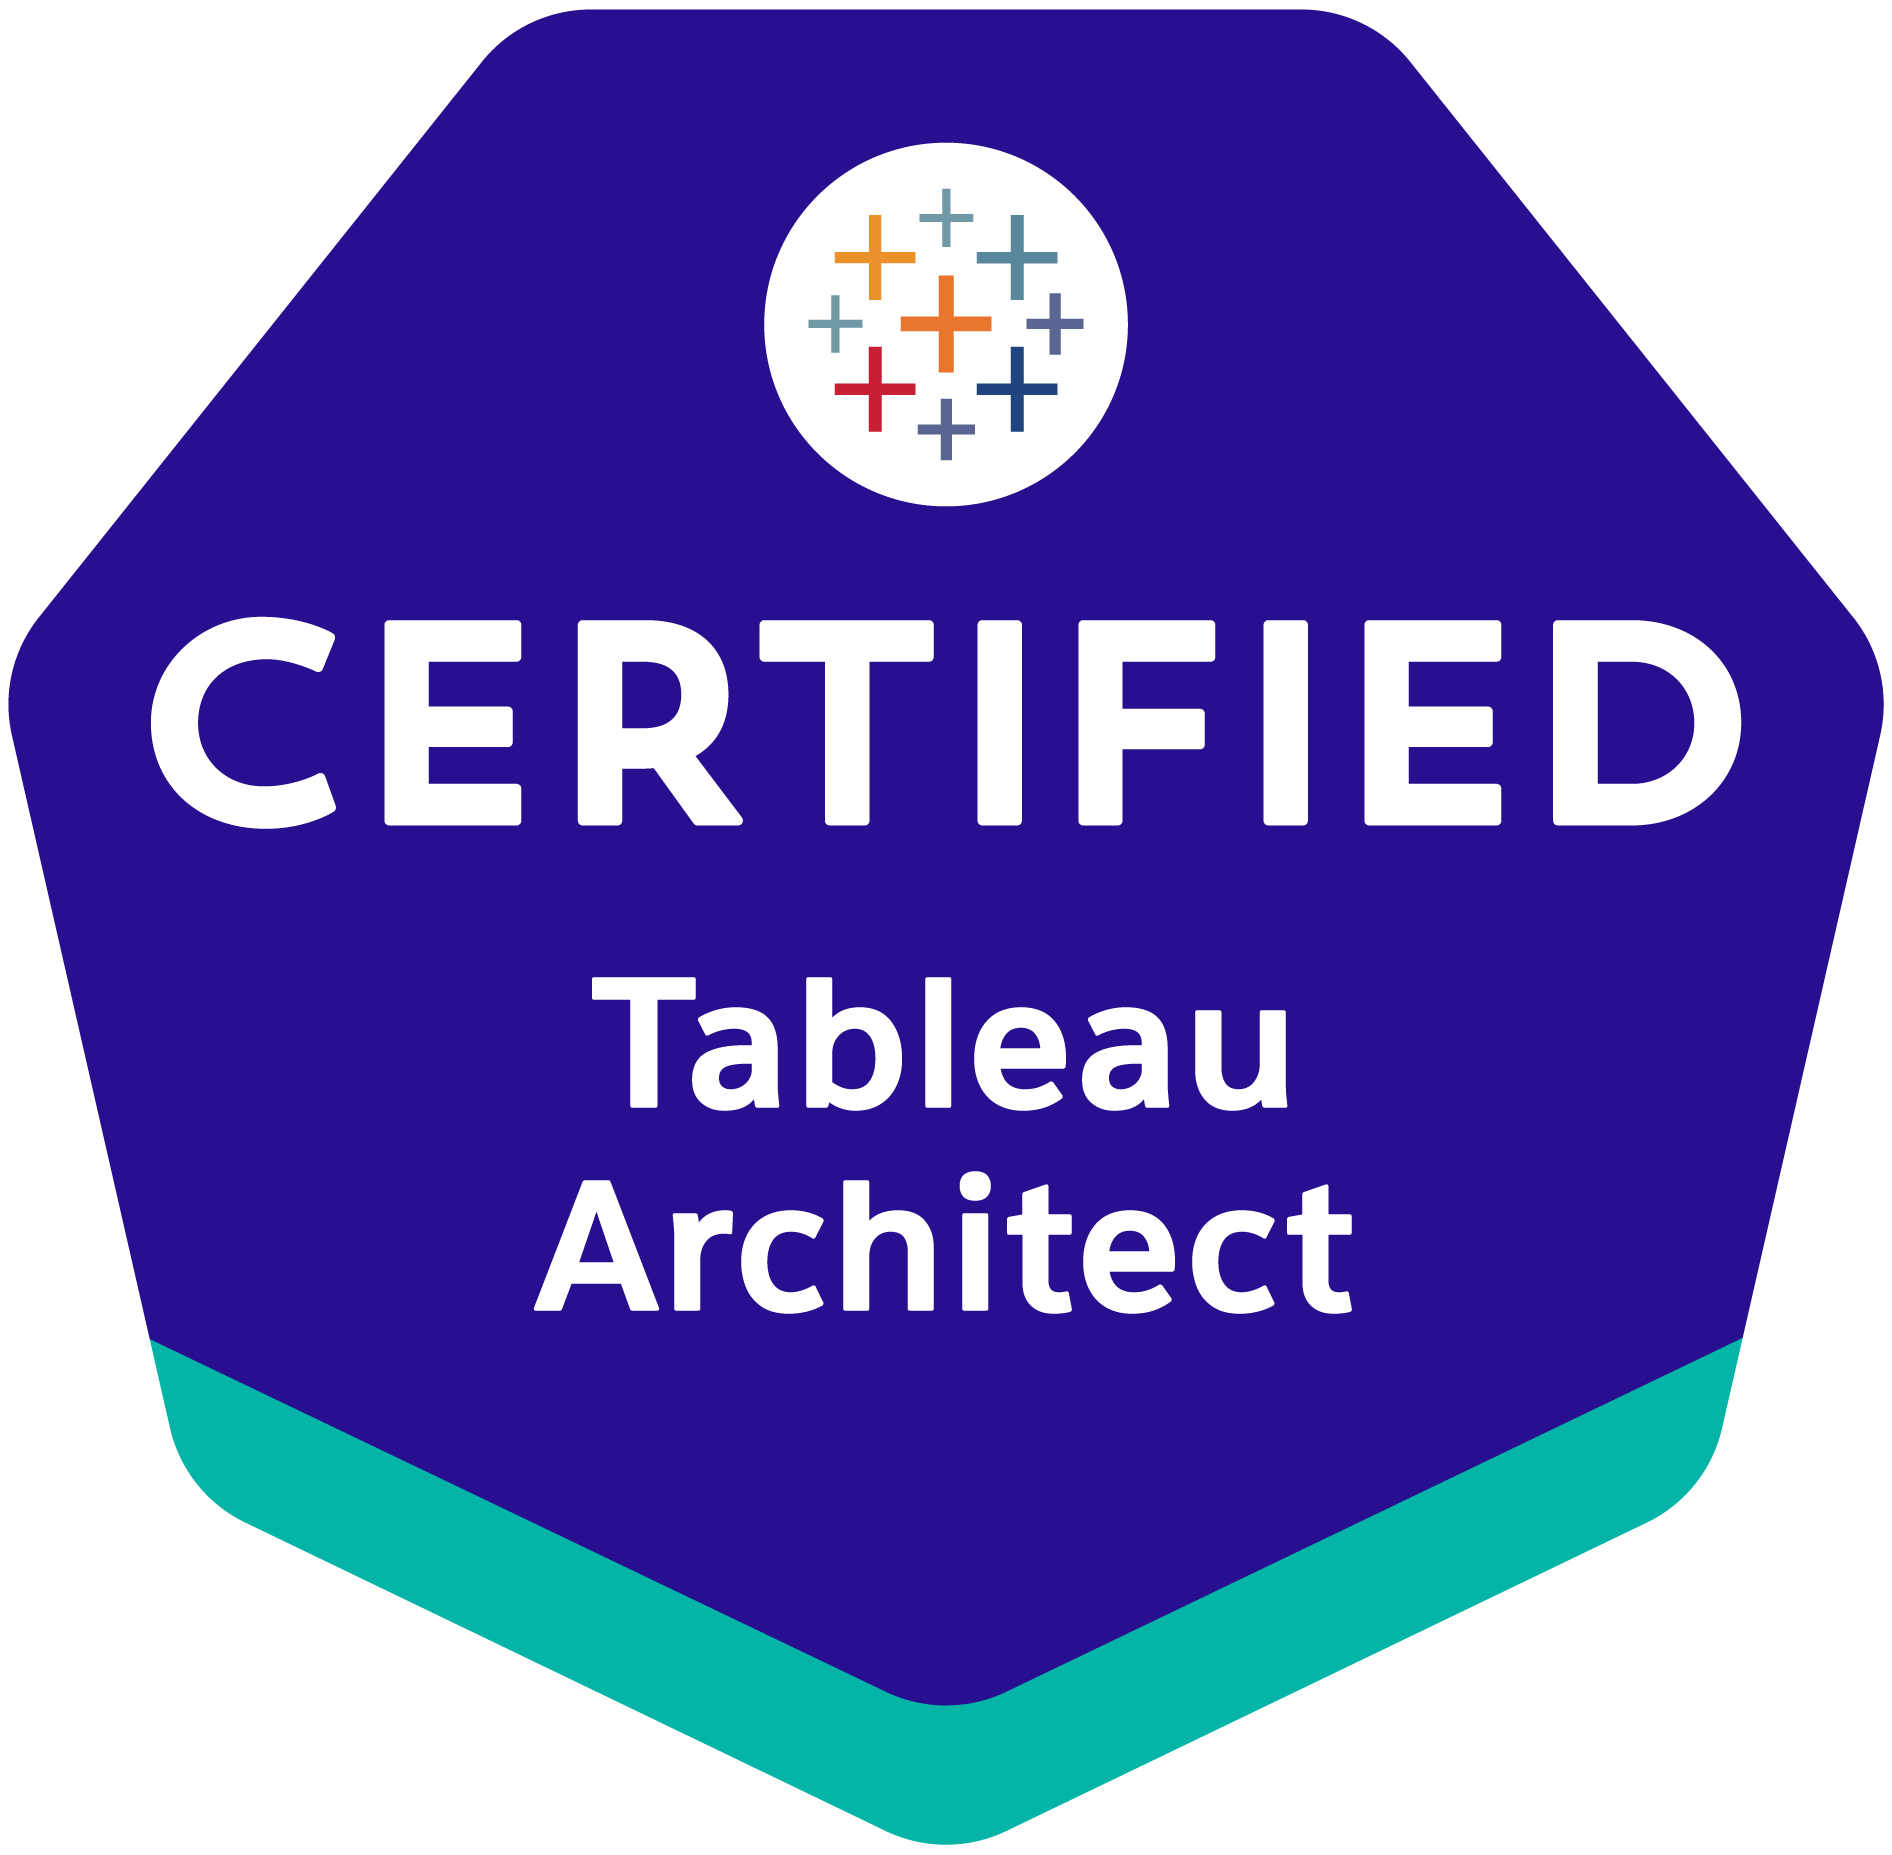 Navigate to Tableau Architect